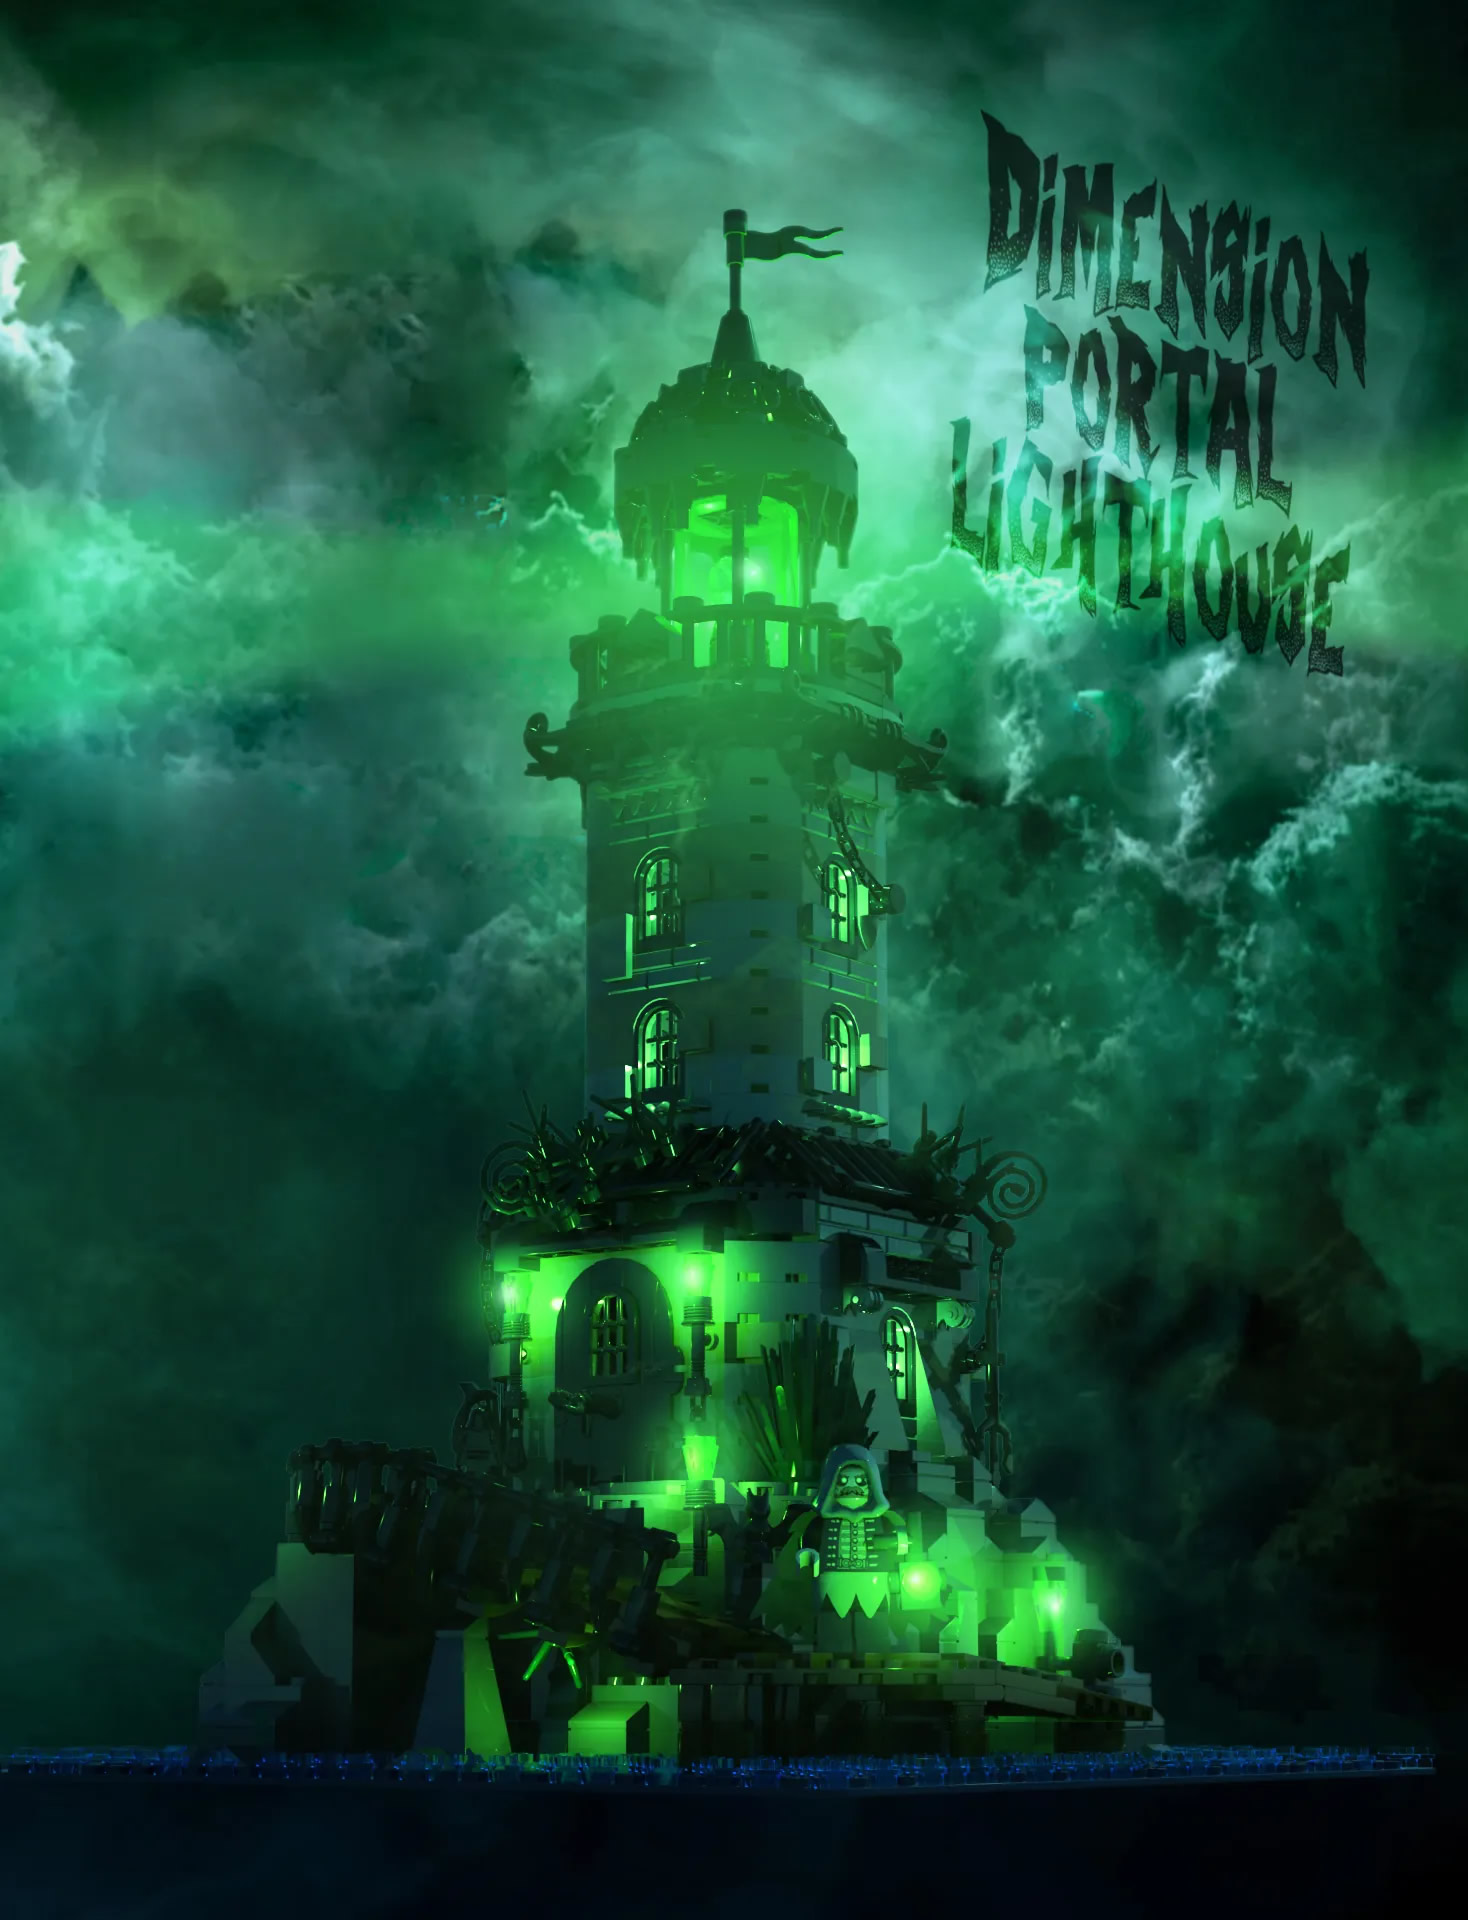 Featured Image for "Dimension Portal Lighthouse" by Delusion Brick